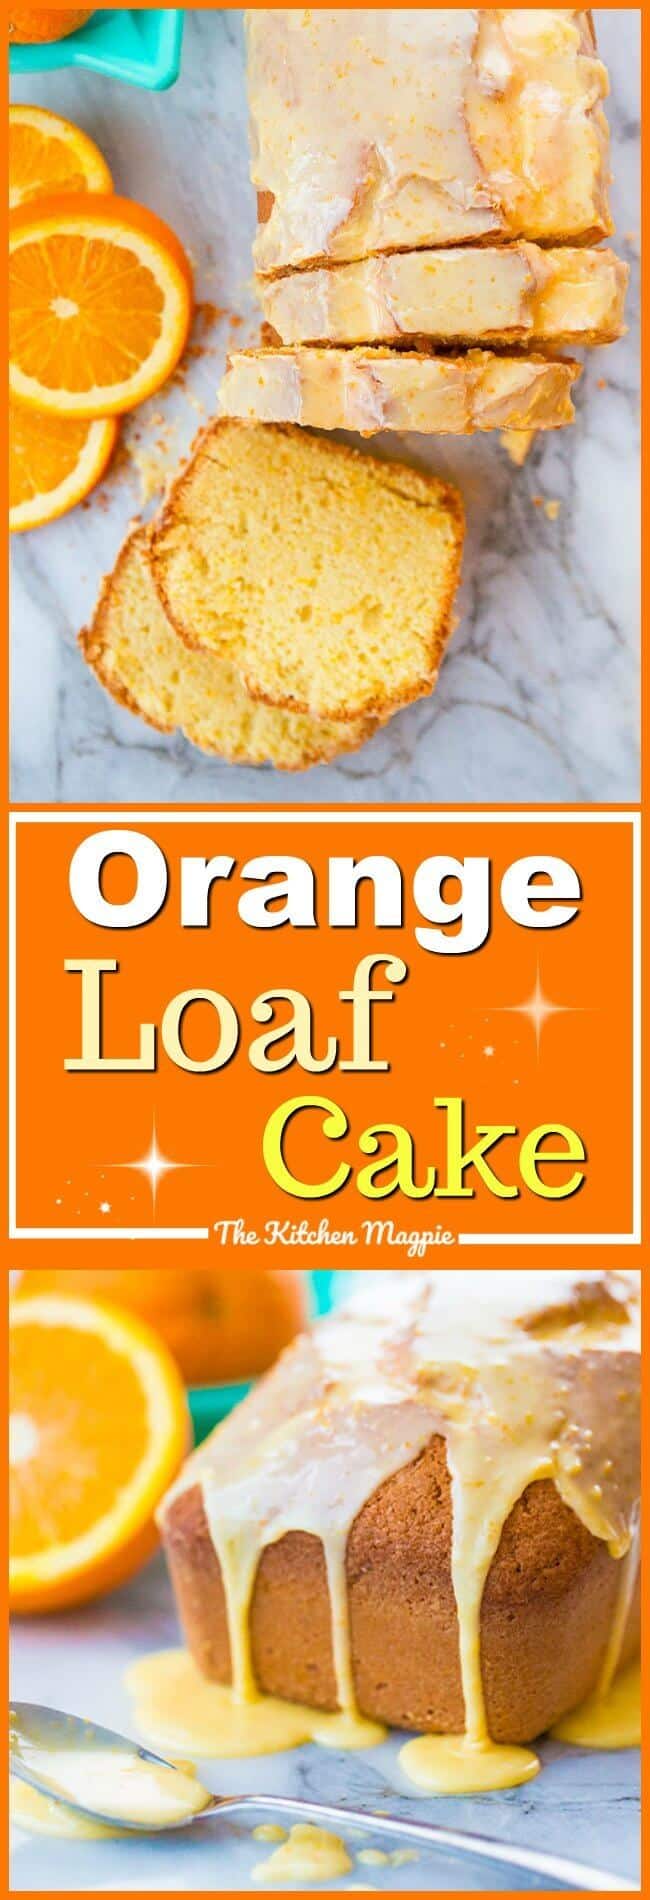 I love a good loaf cake and my amazing orange loaf cake is no exception! The orange icing glaze on top makes this perfectly sweet and tangy! #recipes #dessert #orange #icing